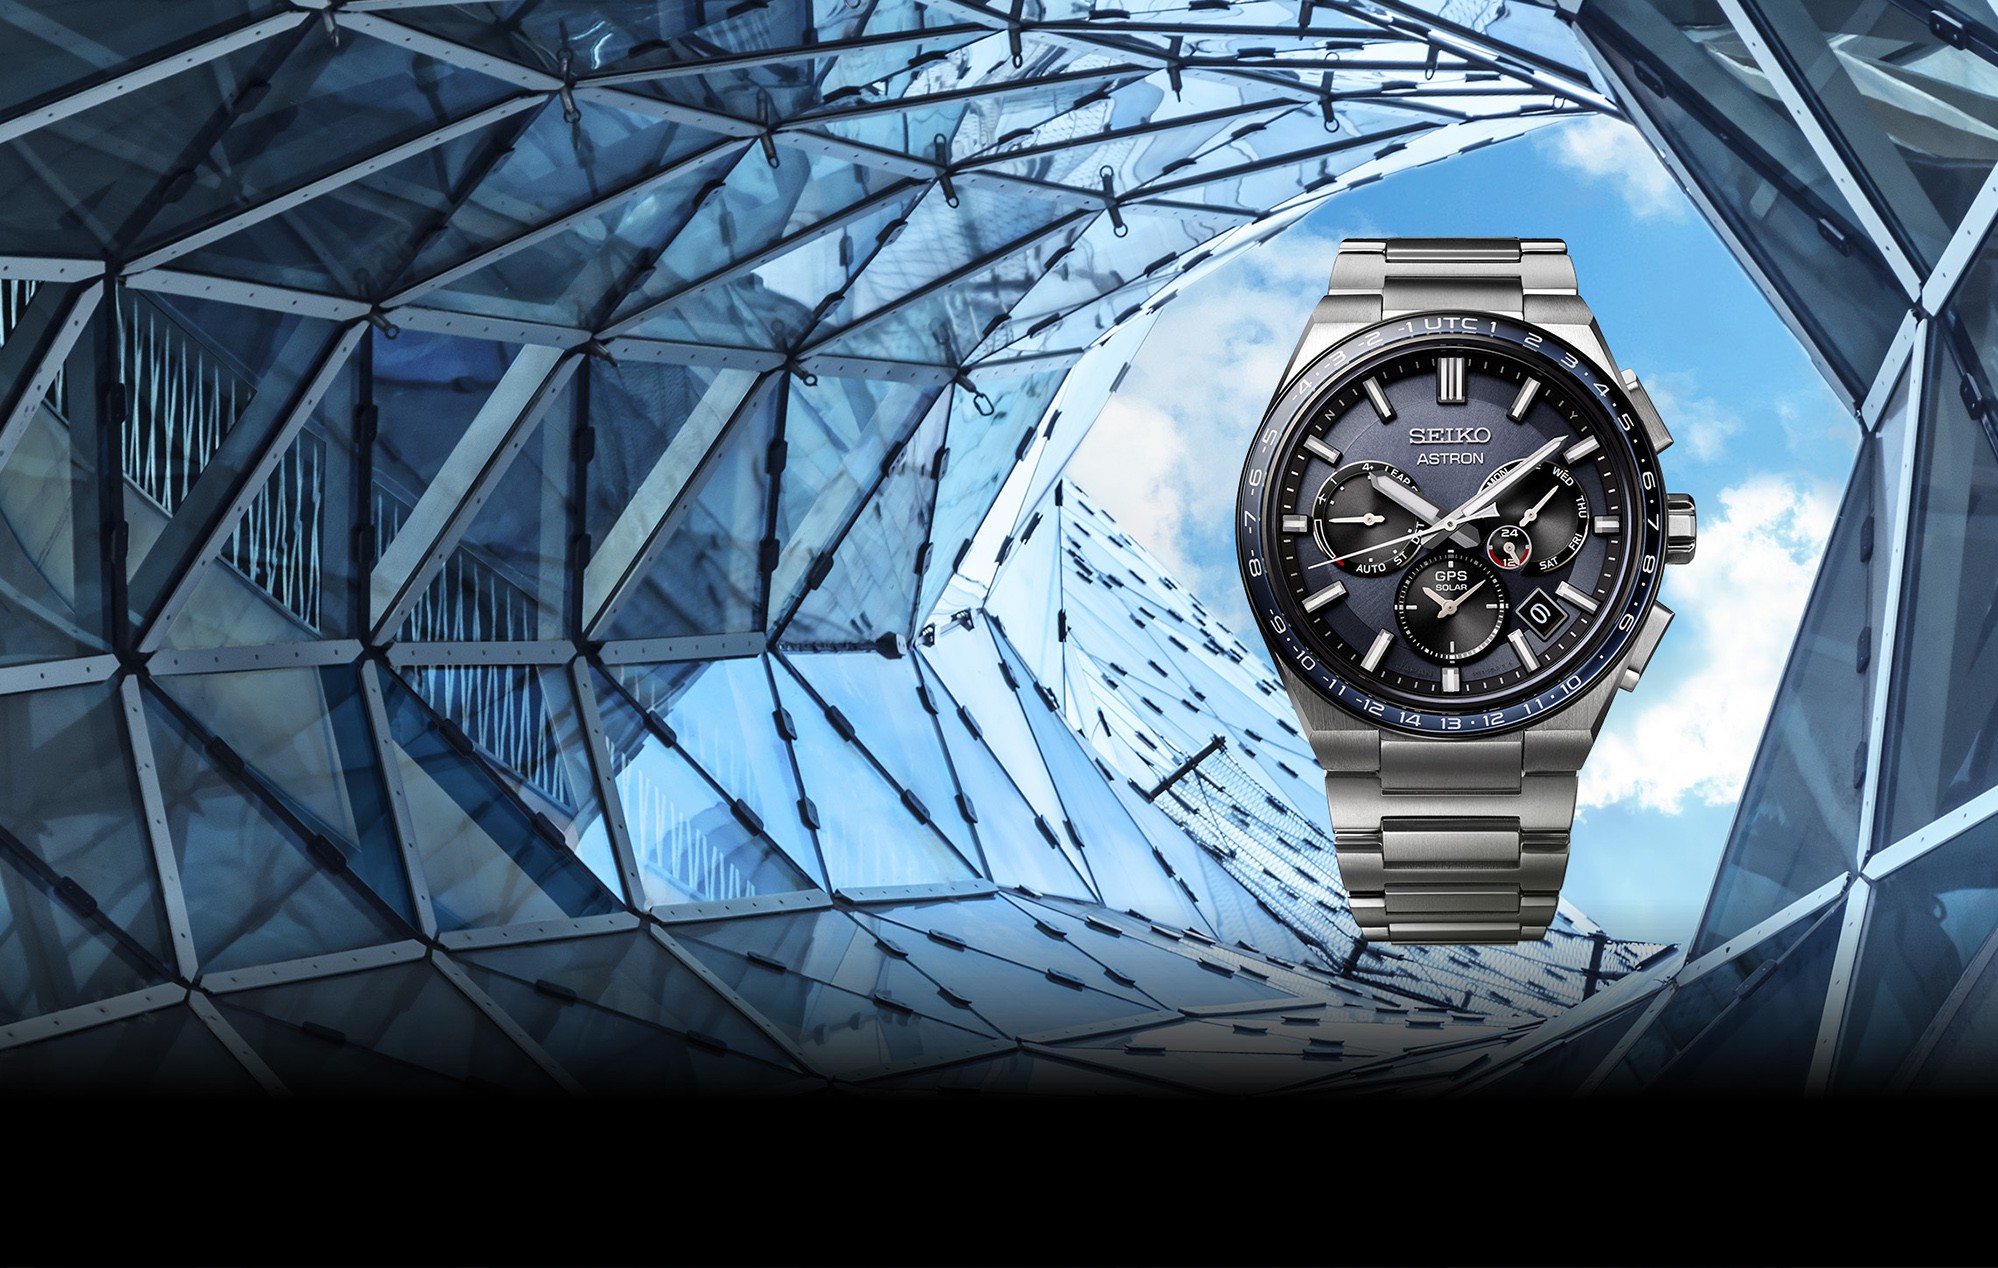 Seiko Astron Solar. The in precision and performance, now in new design for the generation. | Seiko Watch Corporation